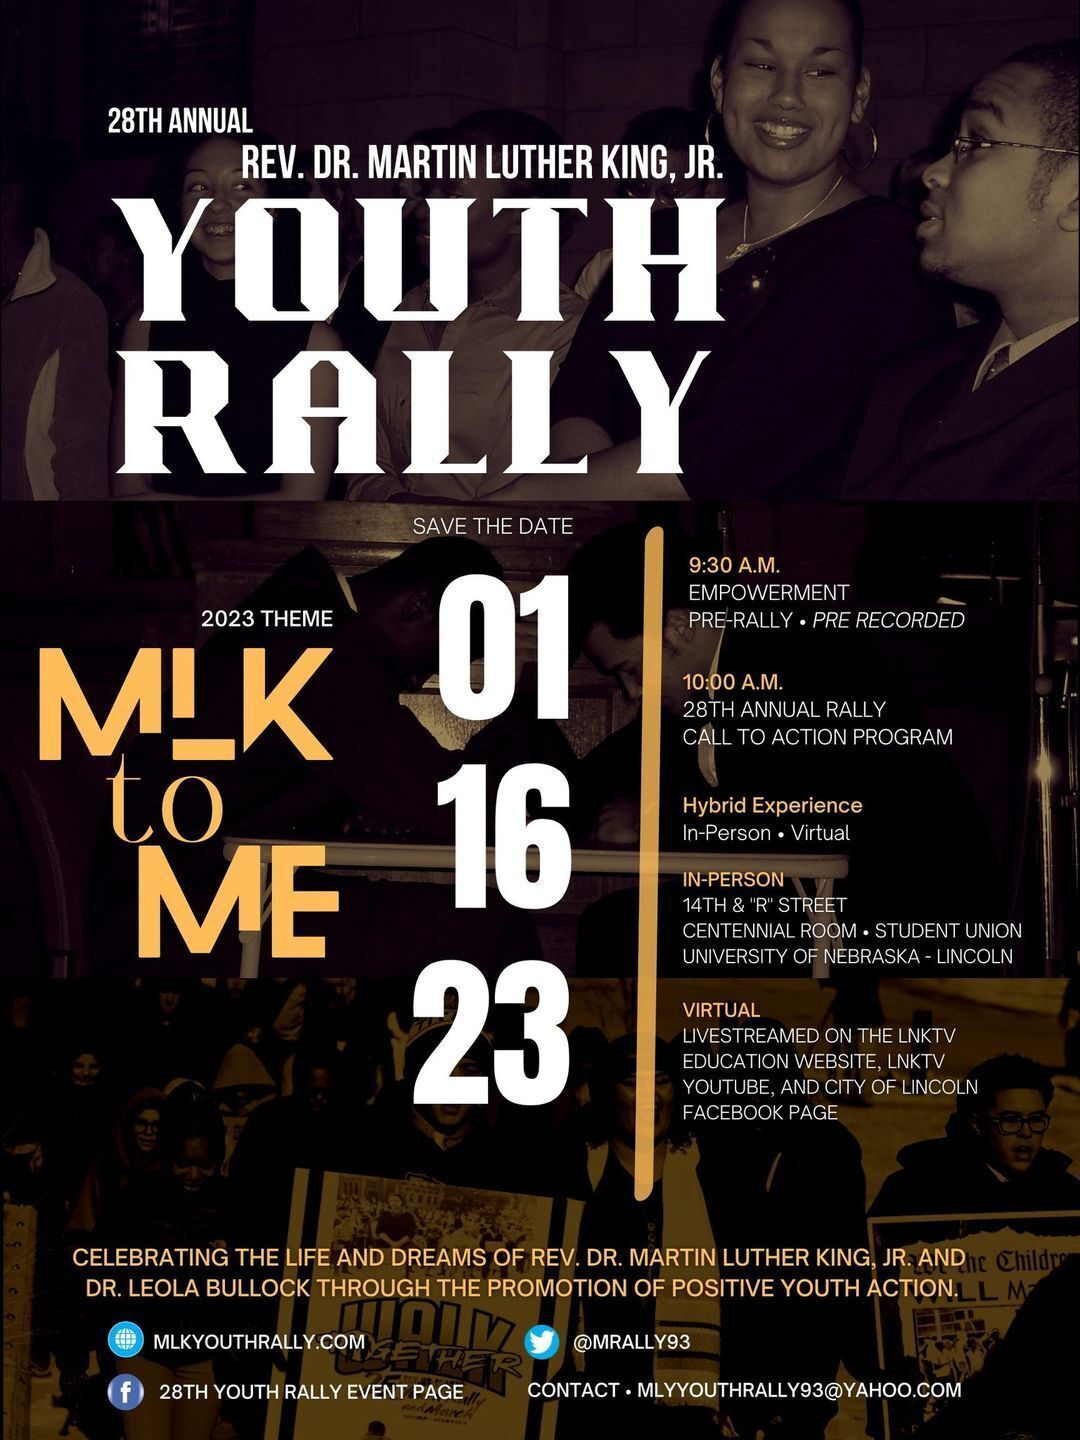 28th Annual Rev. Dr. Martin Luther King, Jr. Youth Rally January 16th, 2023 